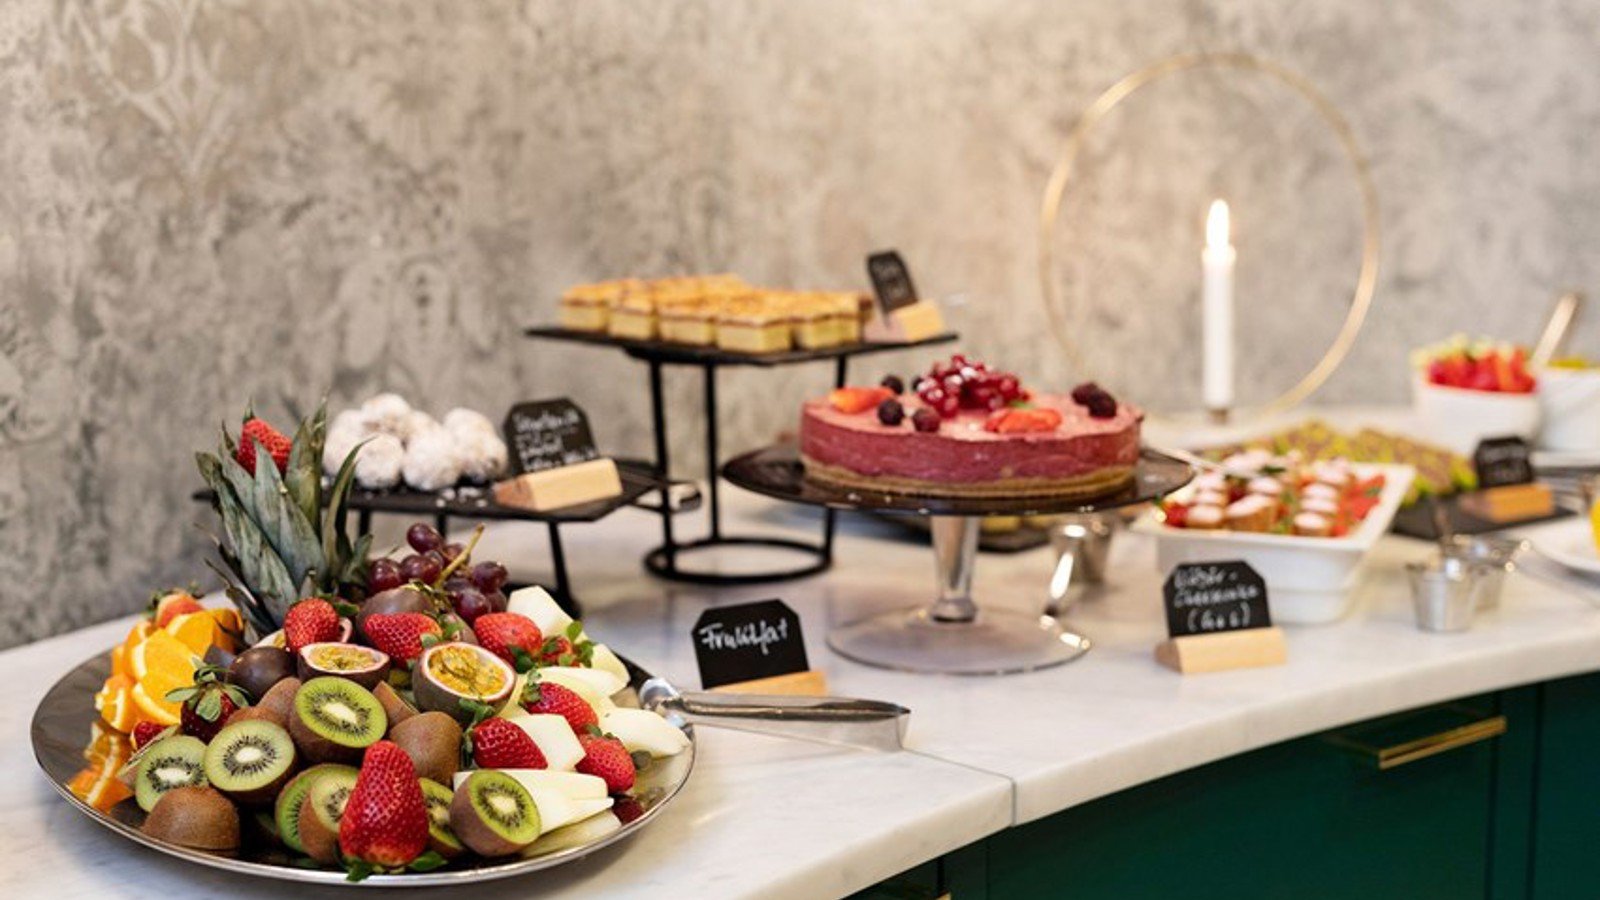 A food buffet with fruit and pastries